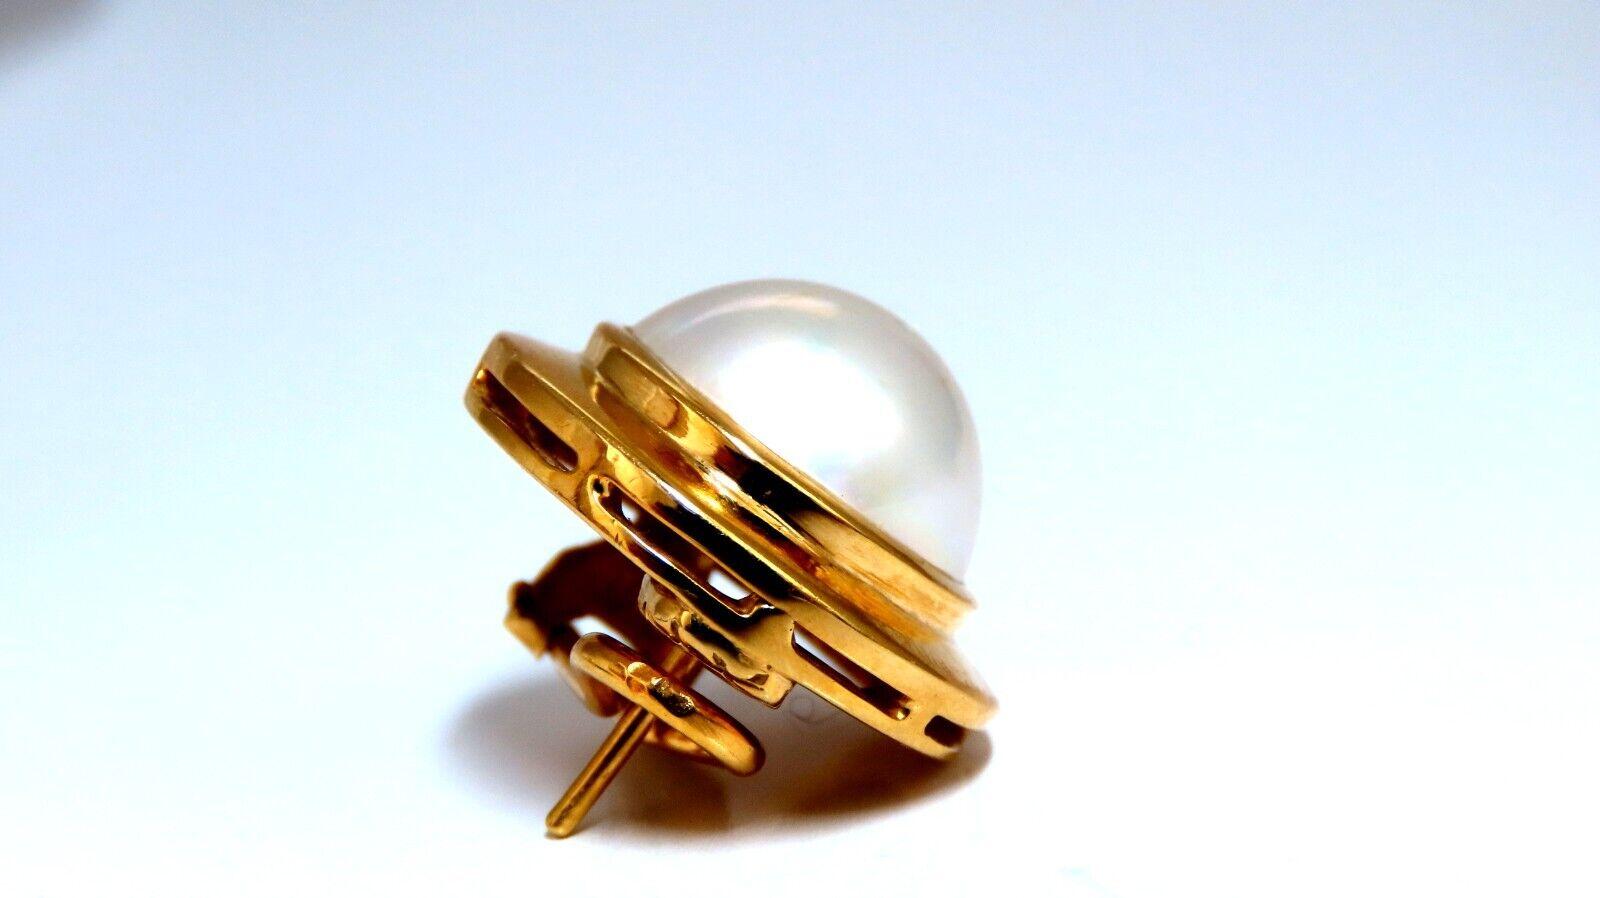 Mabe Pearl clip earrings.

12mm Pearl

Excellent AAA luster and Sheen silver overtone

18 karat yellow gold 20 grams

Overall earrings measure 19mm wide

15 mm depth.

Comfortable Omega Clip.